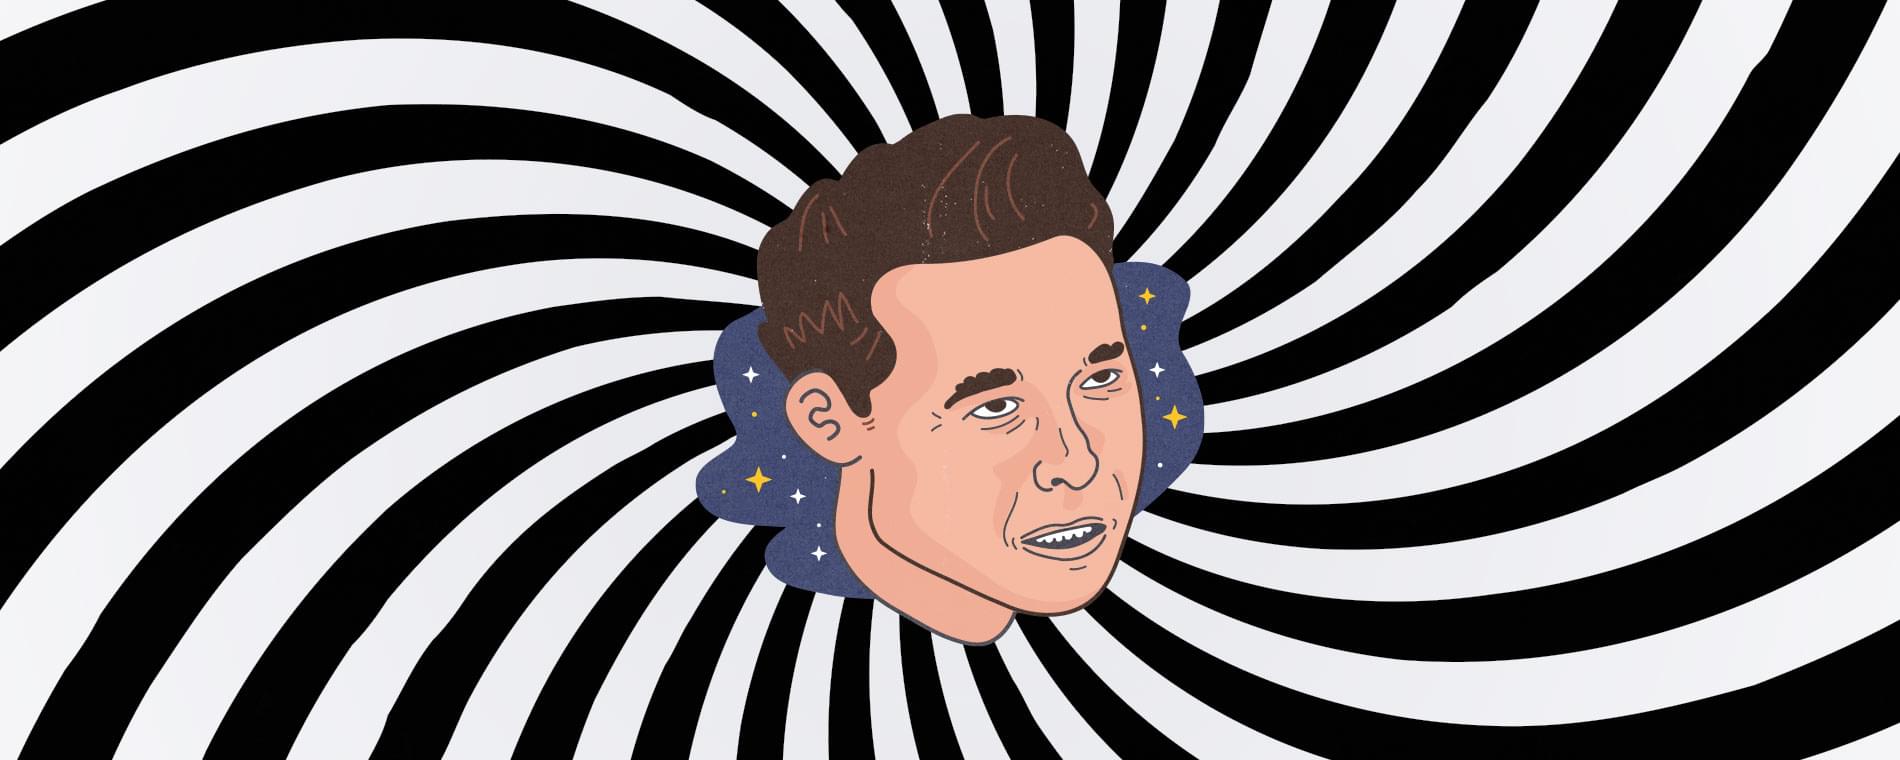 How much influence does Elon Musk actually have over Crypto?